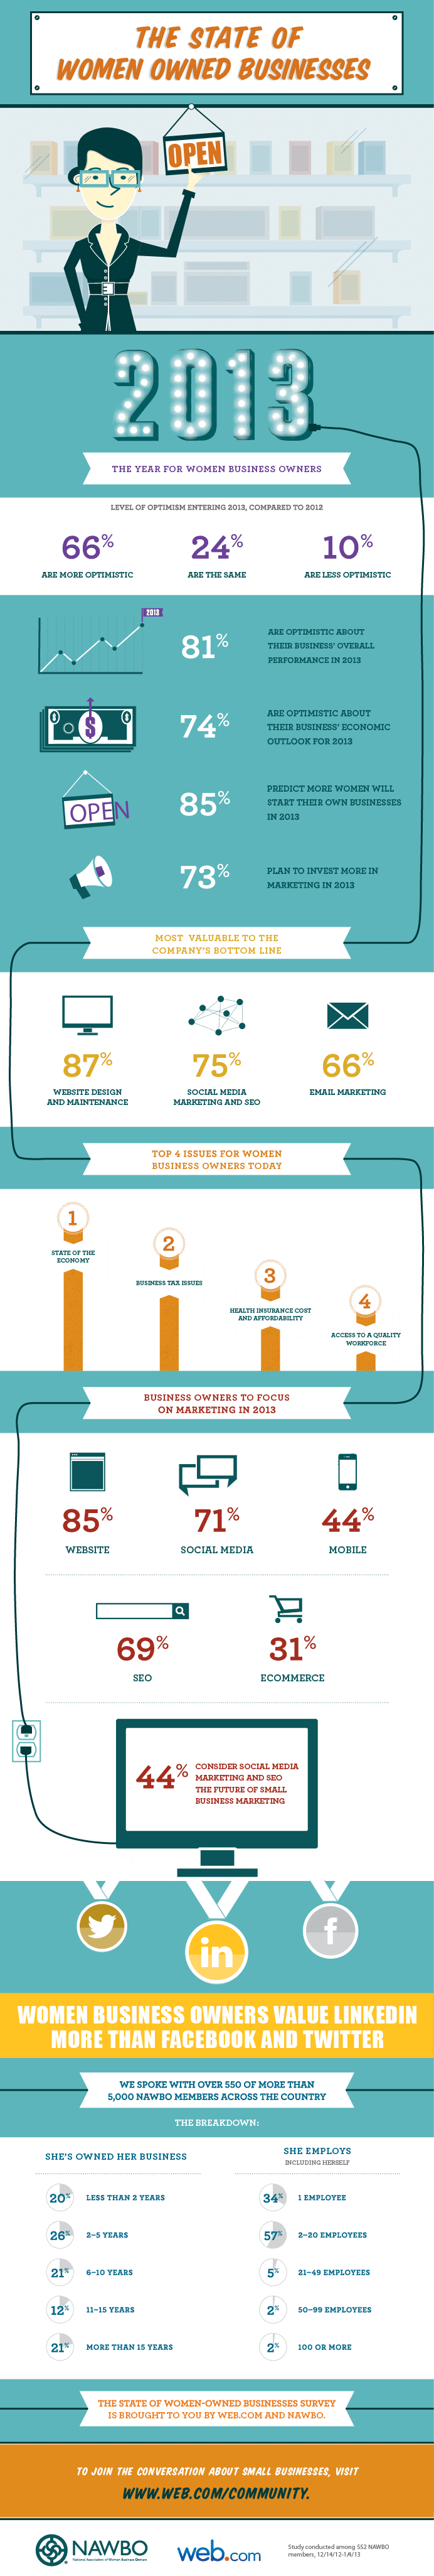 2013 state of women owned businesses infographic